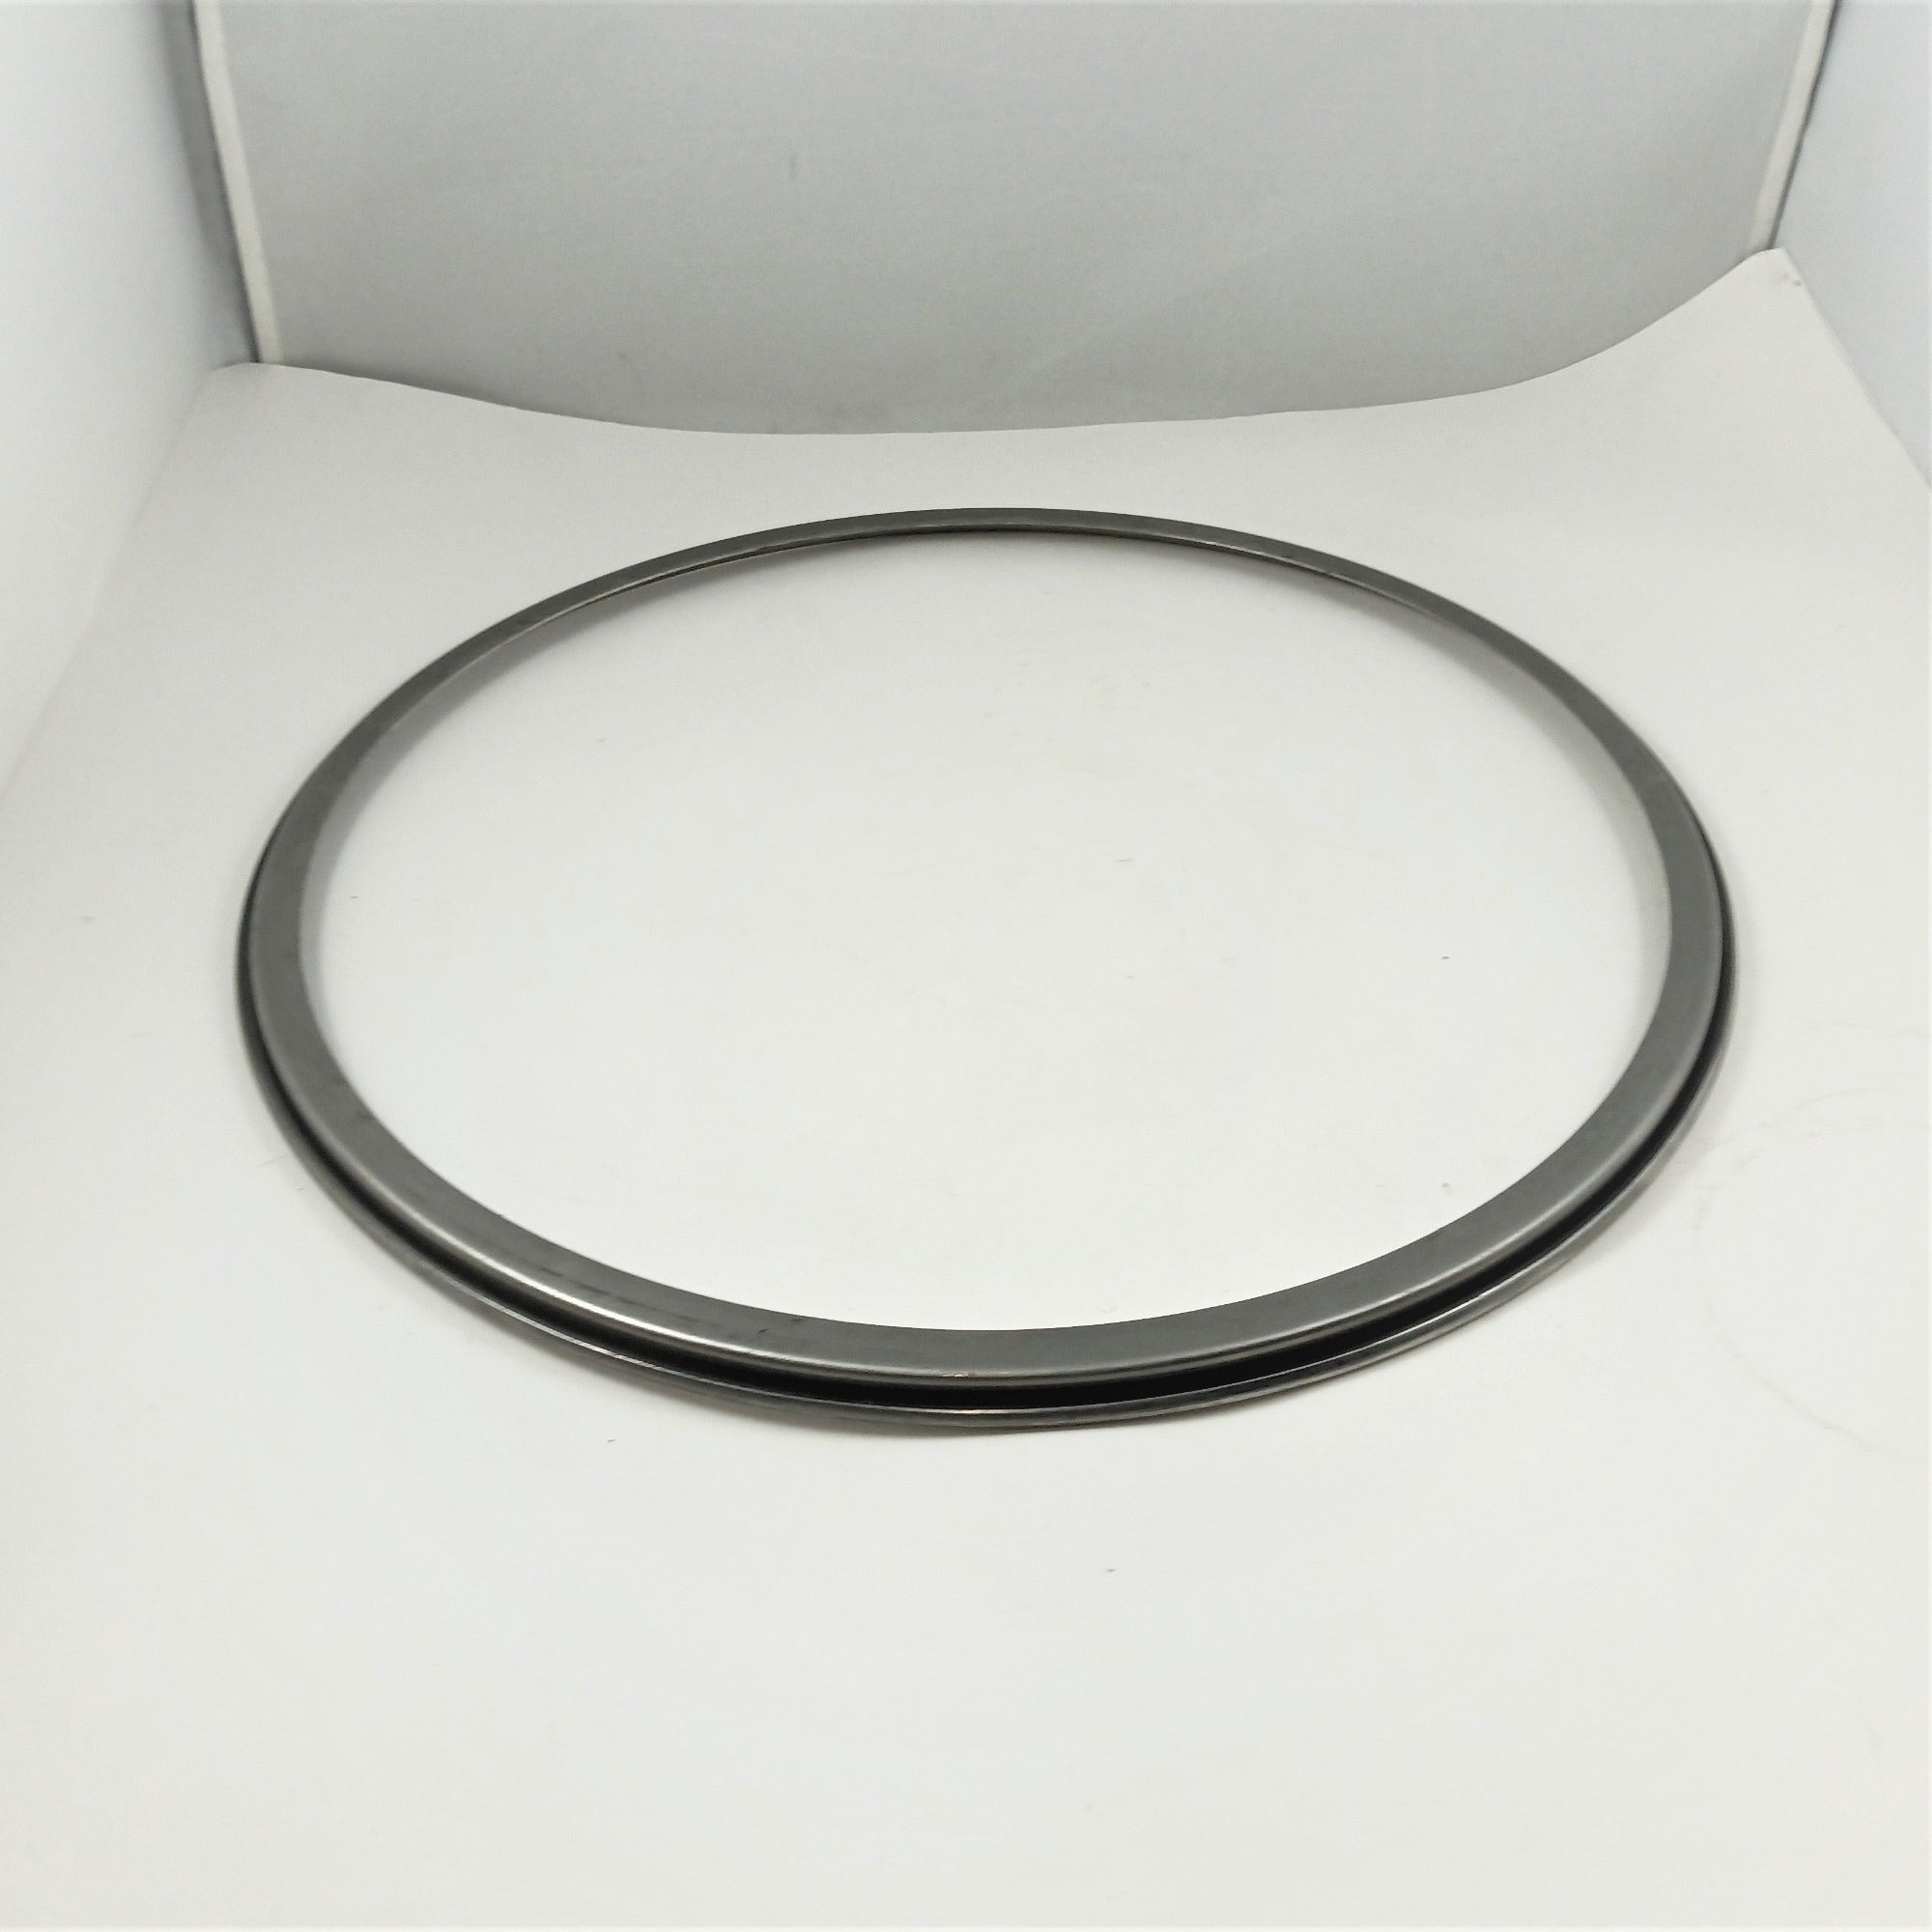 Steel ring unfinished 10" diameter